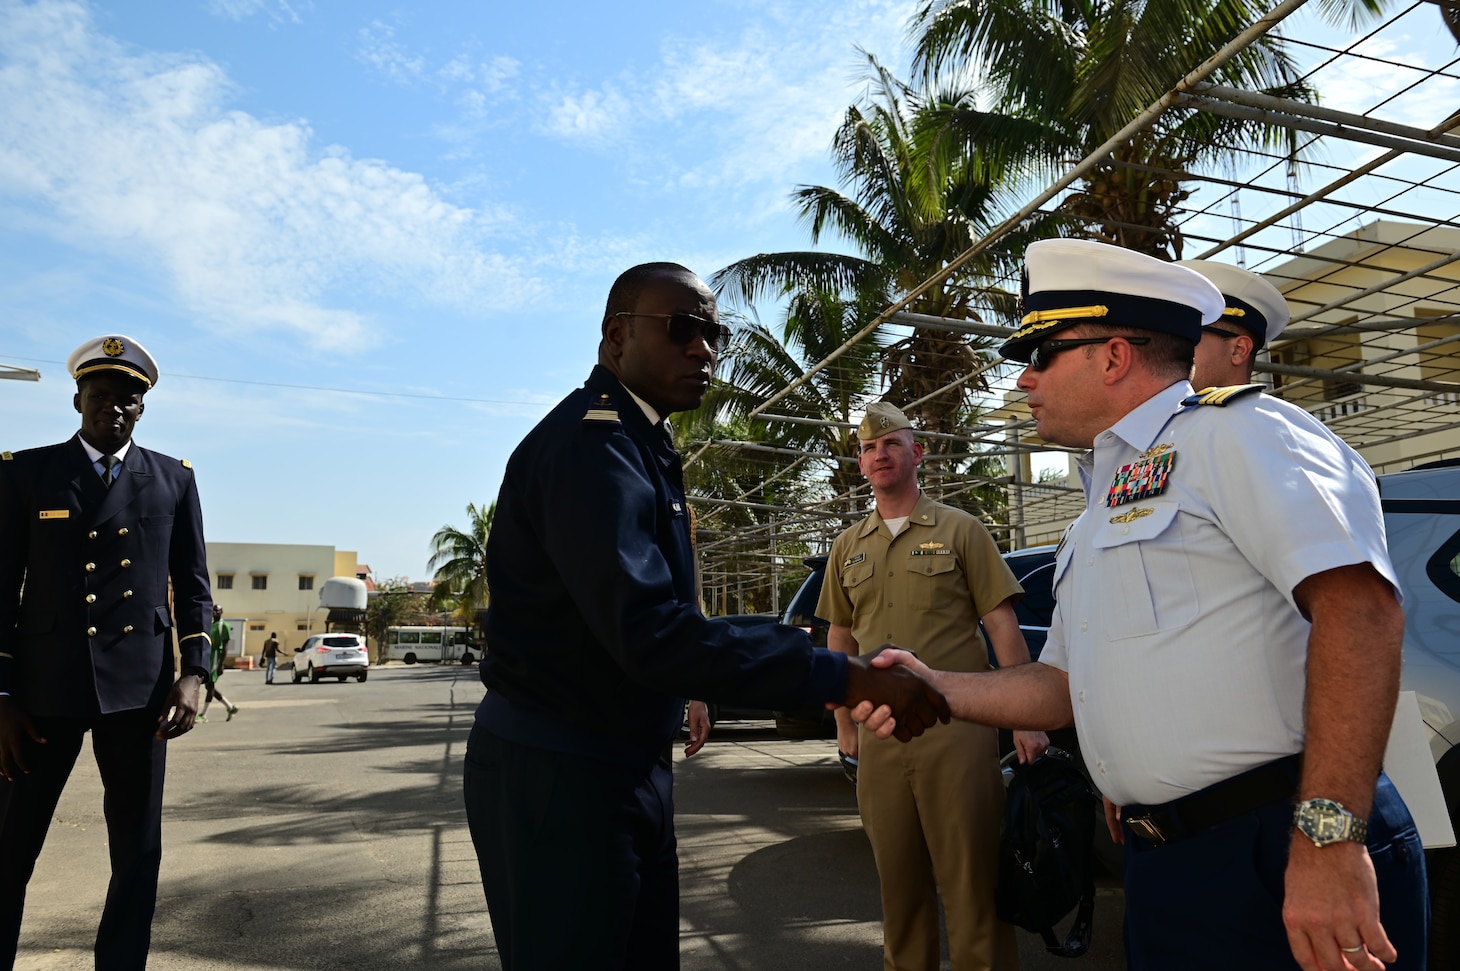 U.S. Coast Guard Cmdr. Corey Kerns, commanding officer of USCGC Spencer (WMEC 905), greets Capt. Karim Mara, Senegalese Navy deputy chief of staff, in Dakar, Senegal, Jan. 17, 2023. Spencer is on a scheduled deployment in the U.S. Naval Forces Africa area of responsibility, employed by the U.S. Sixth Fleet, to carry out joint training, exercises, and maritime security operations alongside AFRICOM partners in support of U.S. interests abroad, regional partnerships, and to strengthen international maritime governance. (U.S. Coast Guard photo by Petty Officer 3rd Class Mikaela McGee)